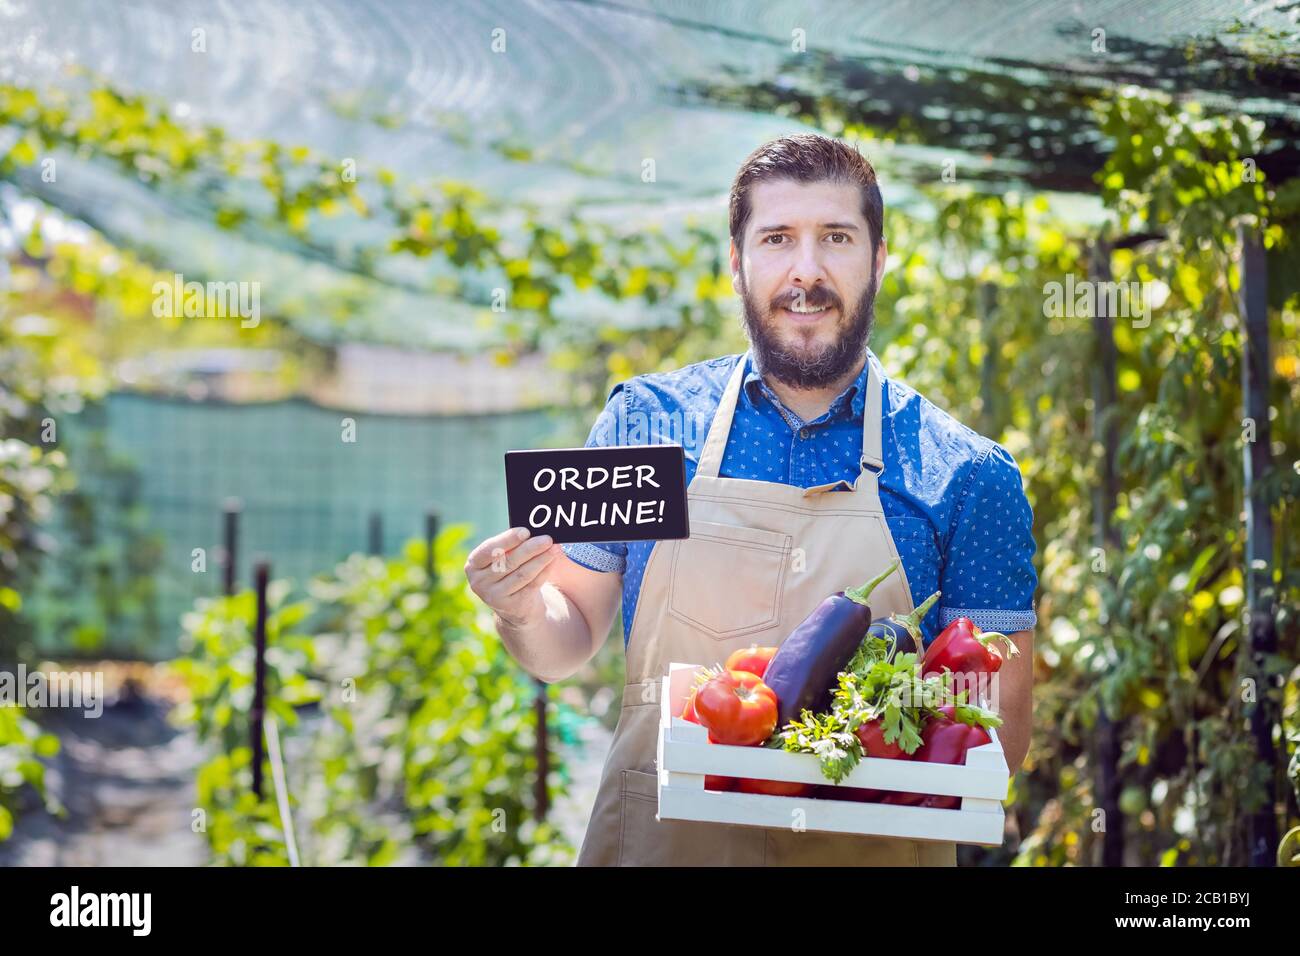 Order online food box from local farmer to support small businesses Stock Photo